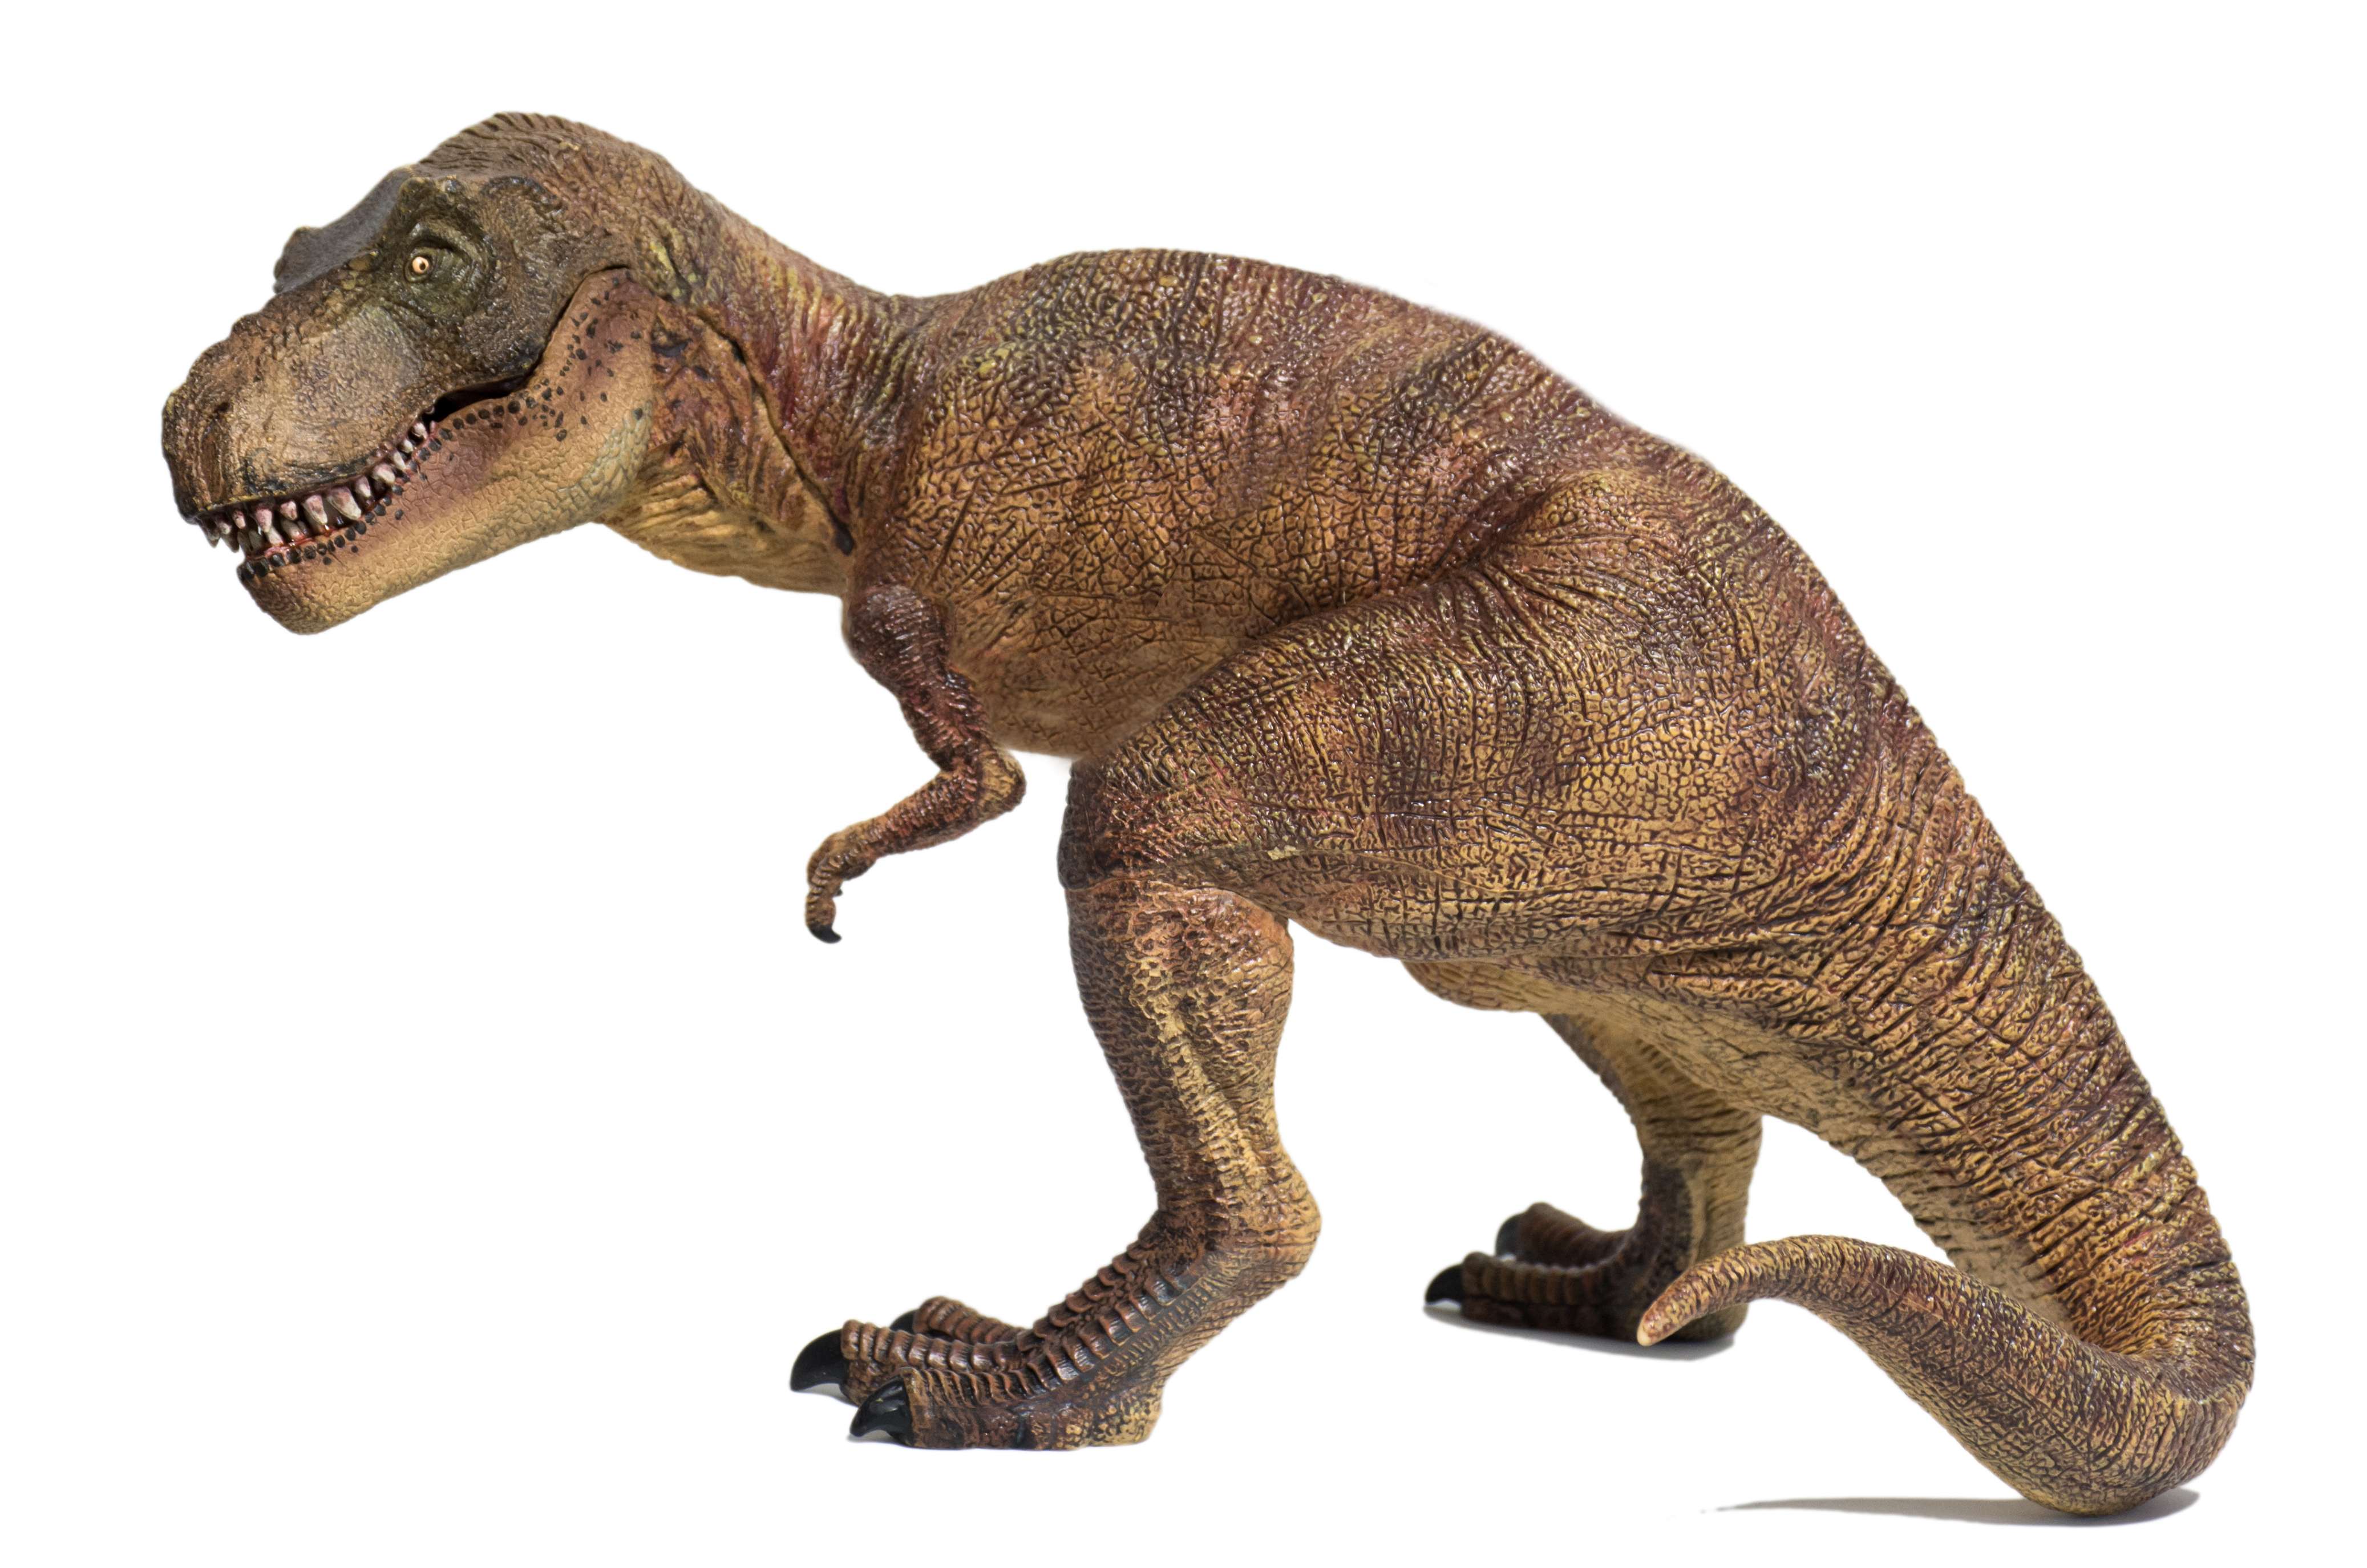 How T. rex Came to Rule the World